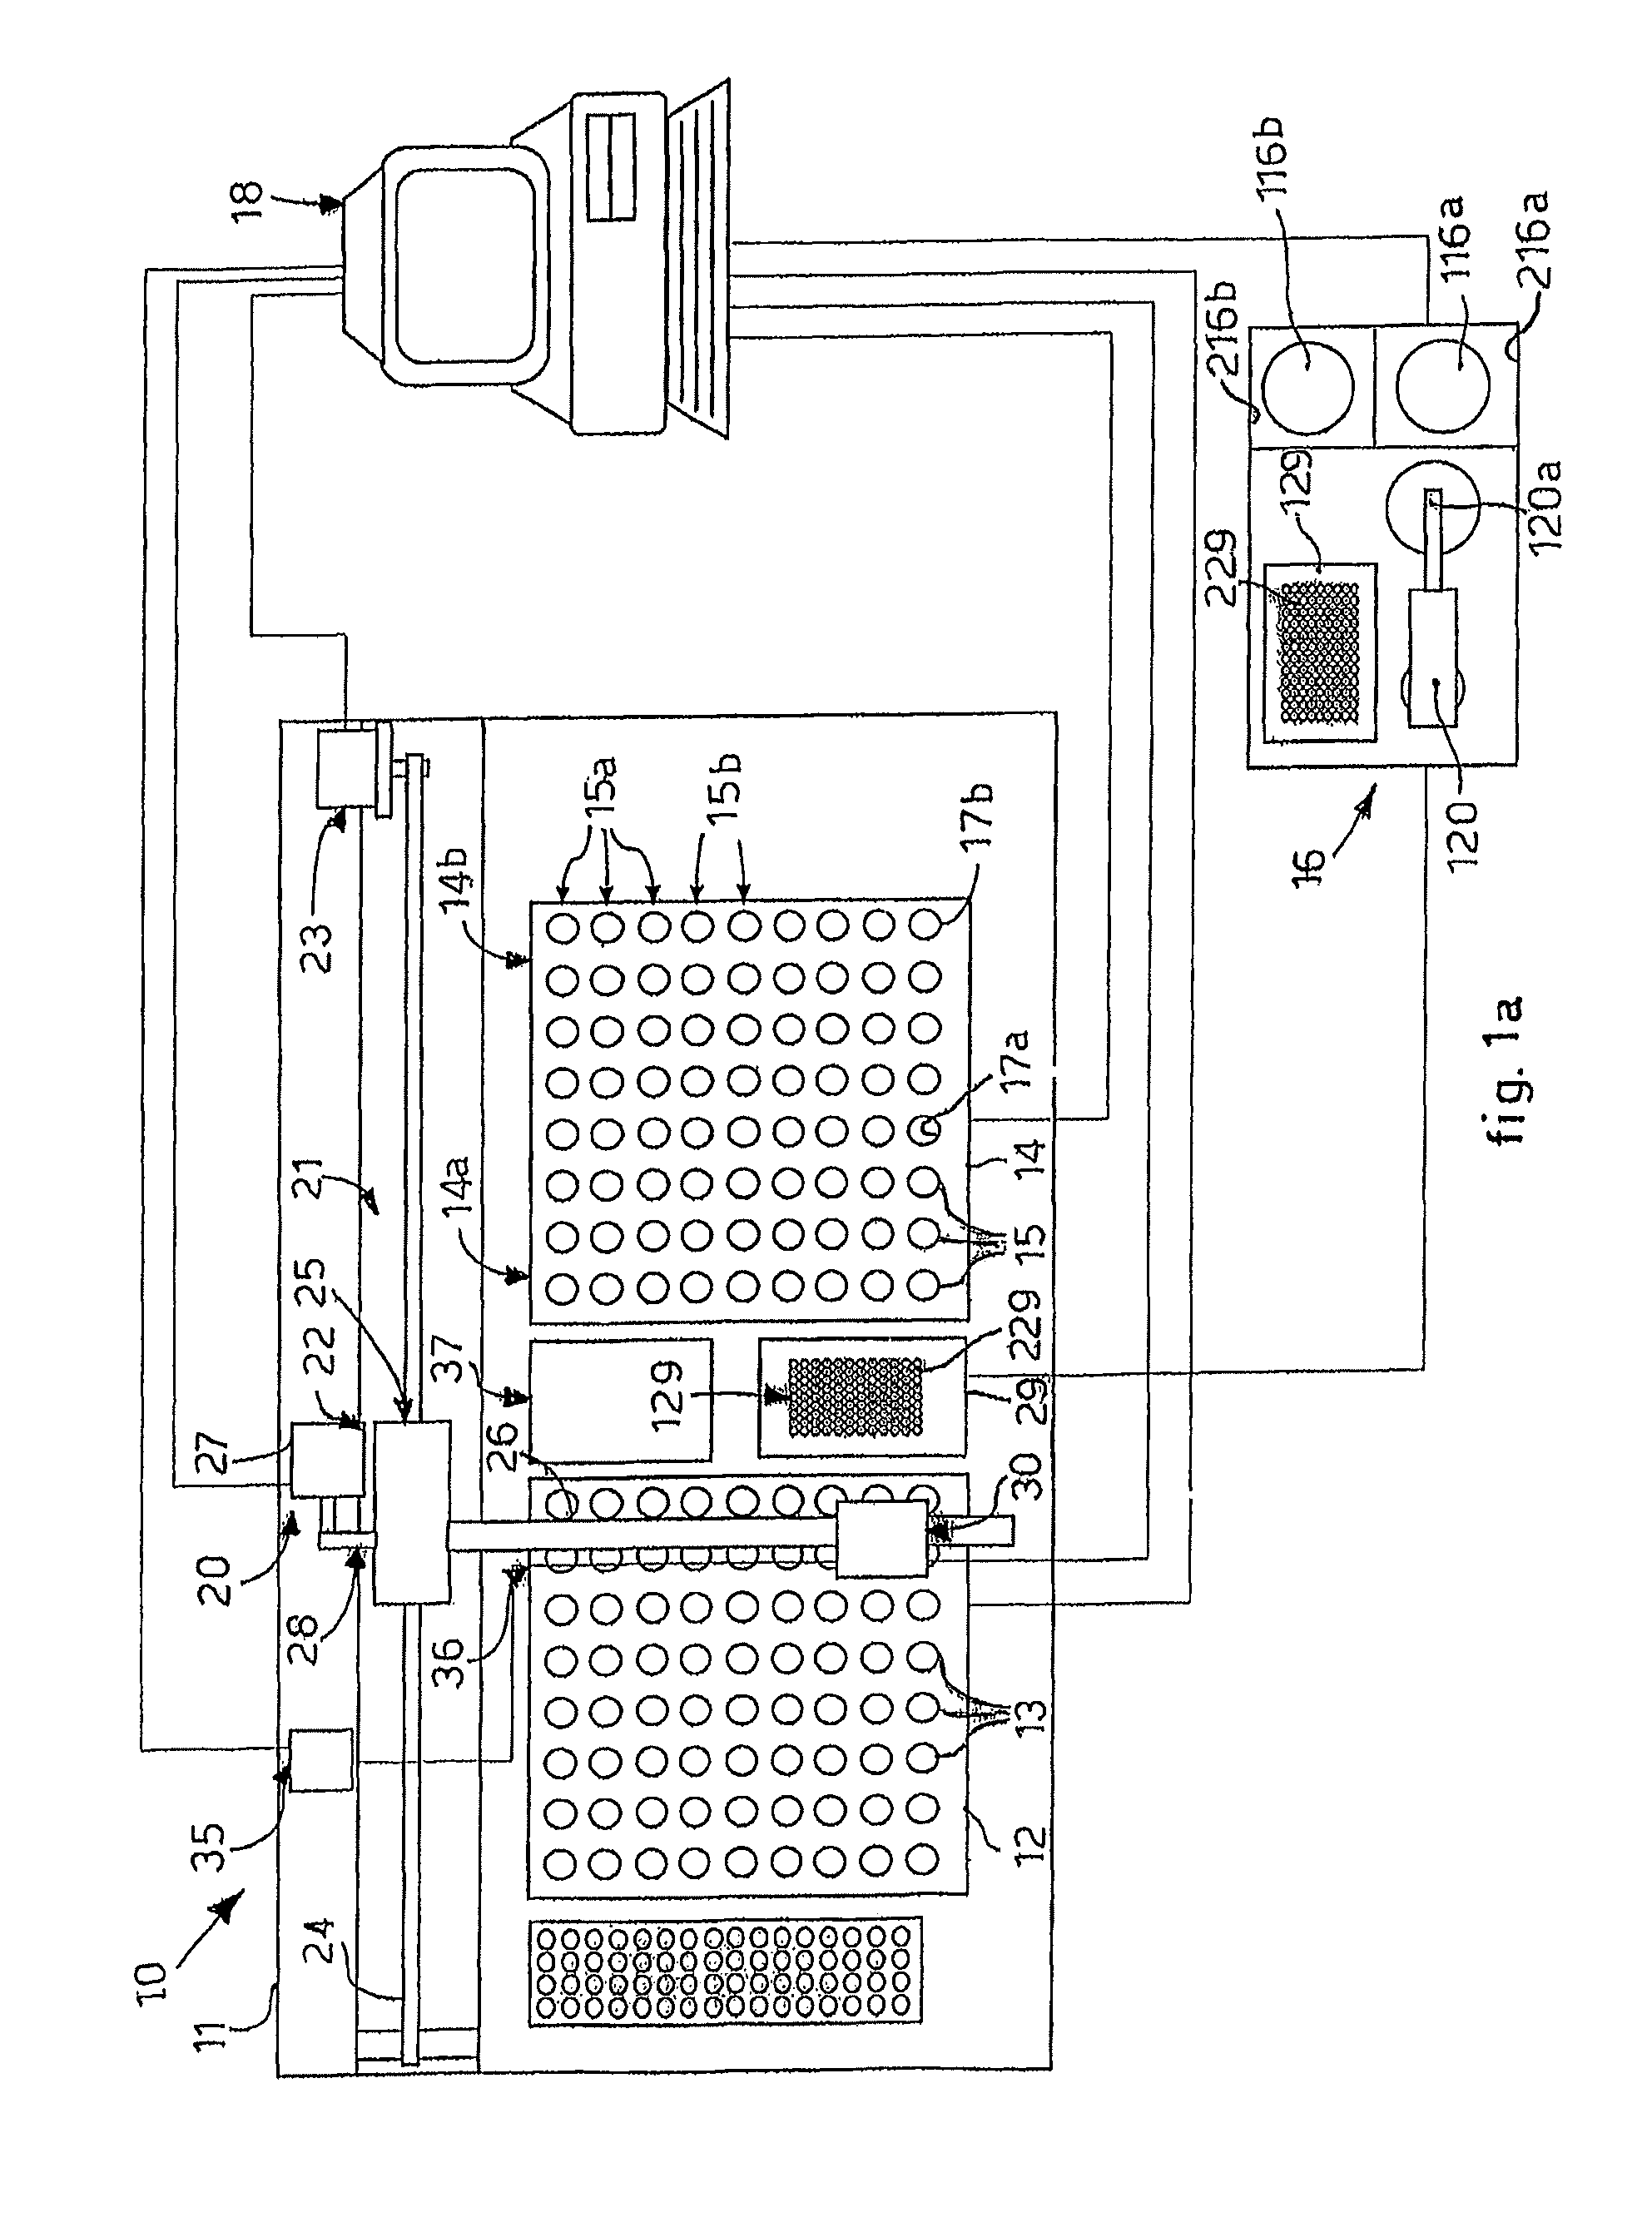 Device and method for diagnostic analyses